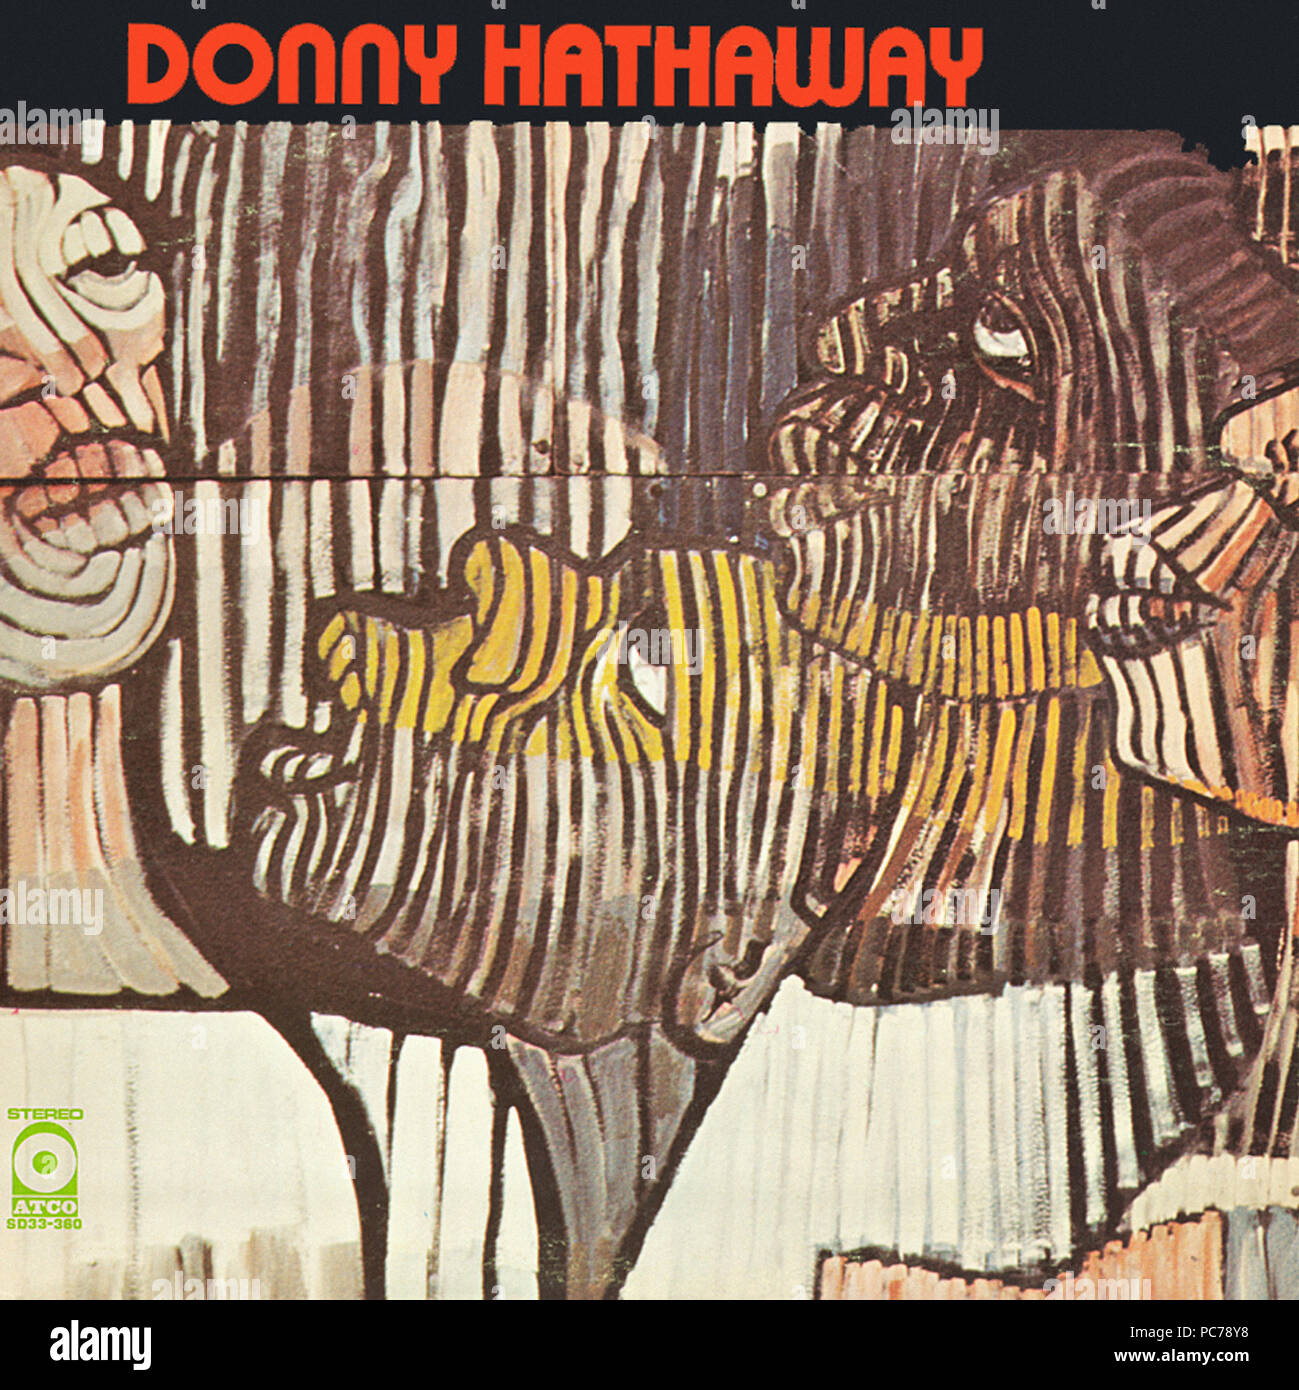 Donny Hathaway – Donny Hathaway  -  vintage vinyl cover album (Front) Stock Photo